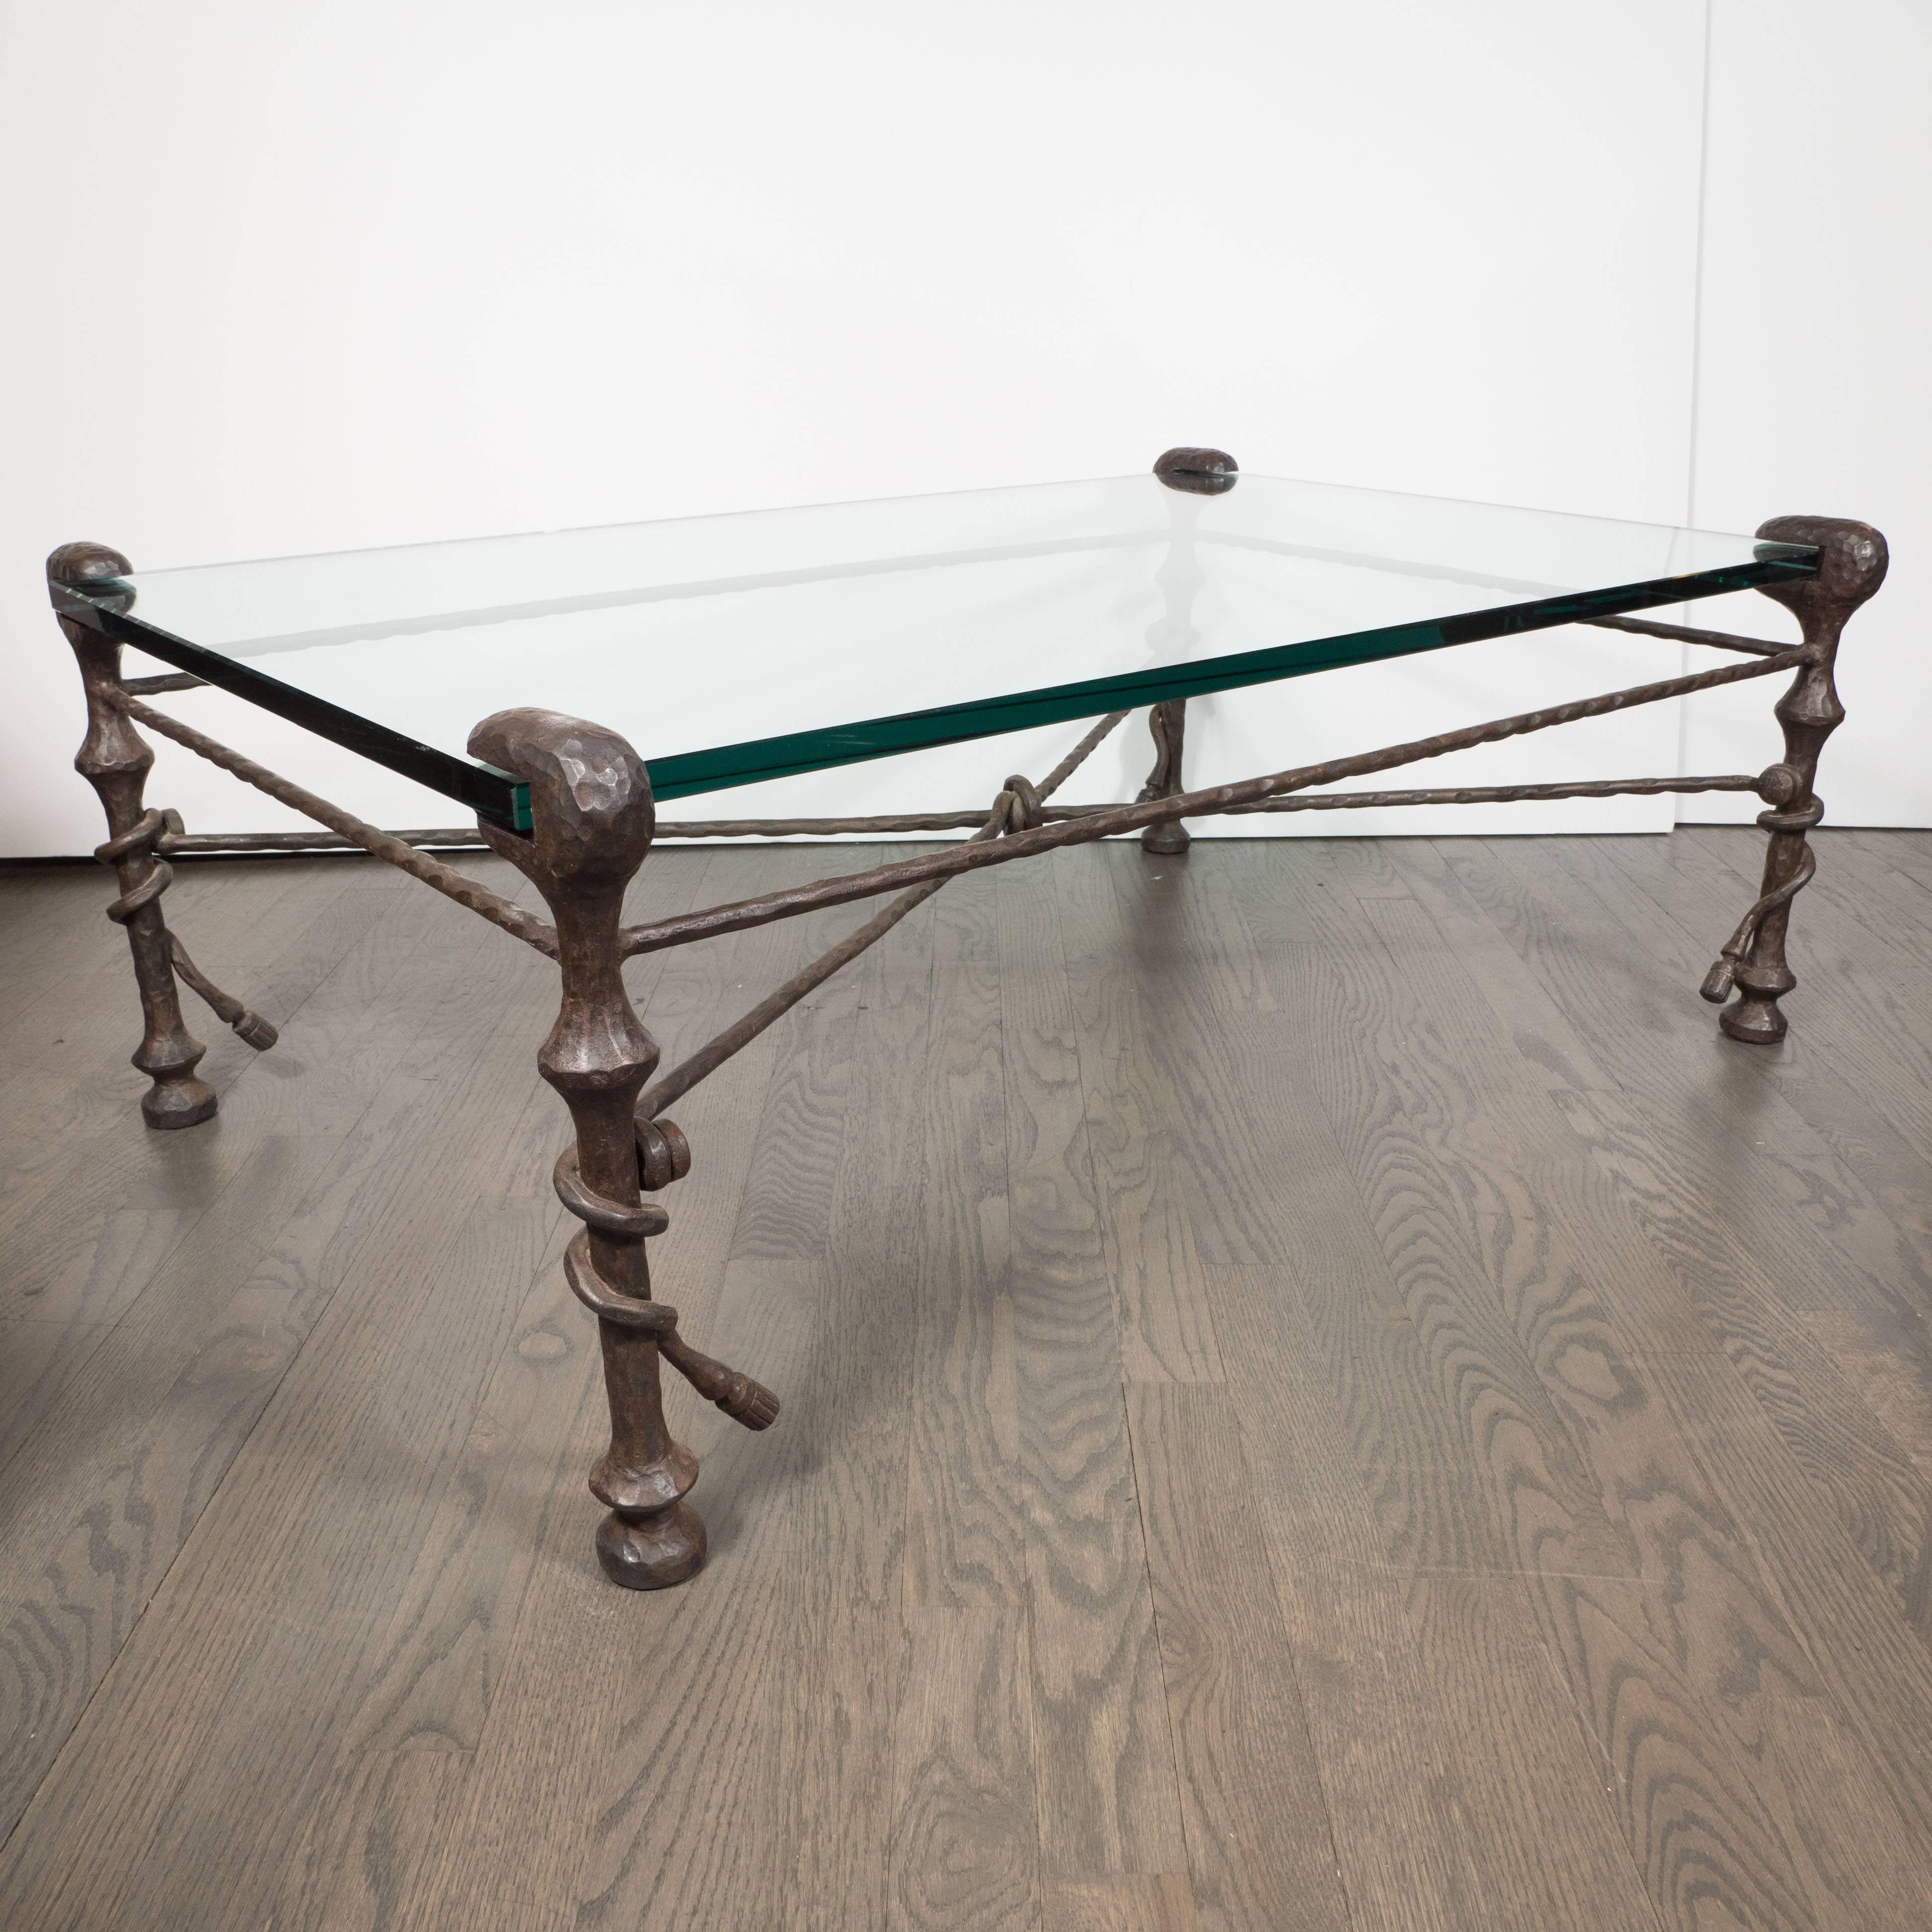 This stunning bronze table was realized in the United States, circa 1960. With its organic, anthropomorphic forms fastidiously hand crafted in bronze, this table evokes the celebrated work of Diego Giacometti. This table offers four legs with